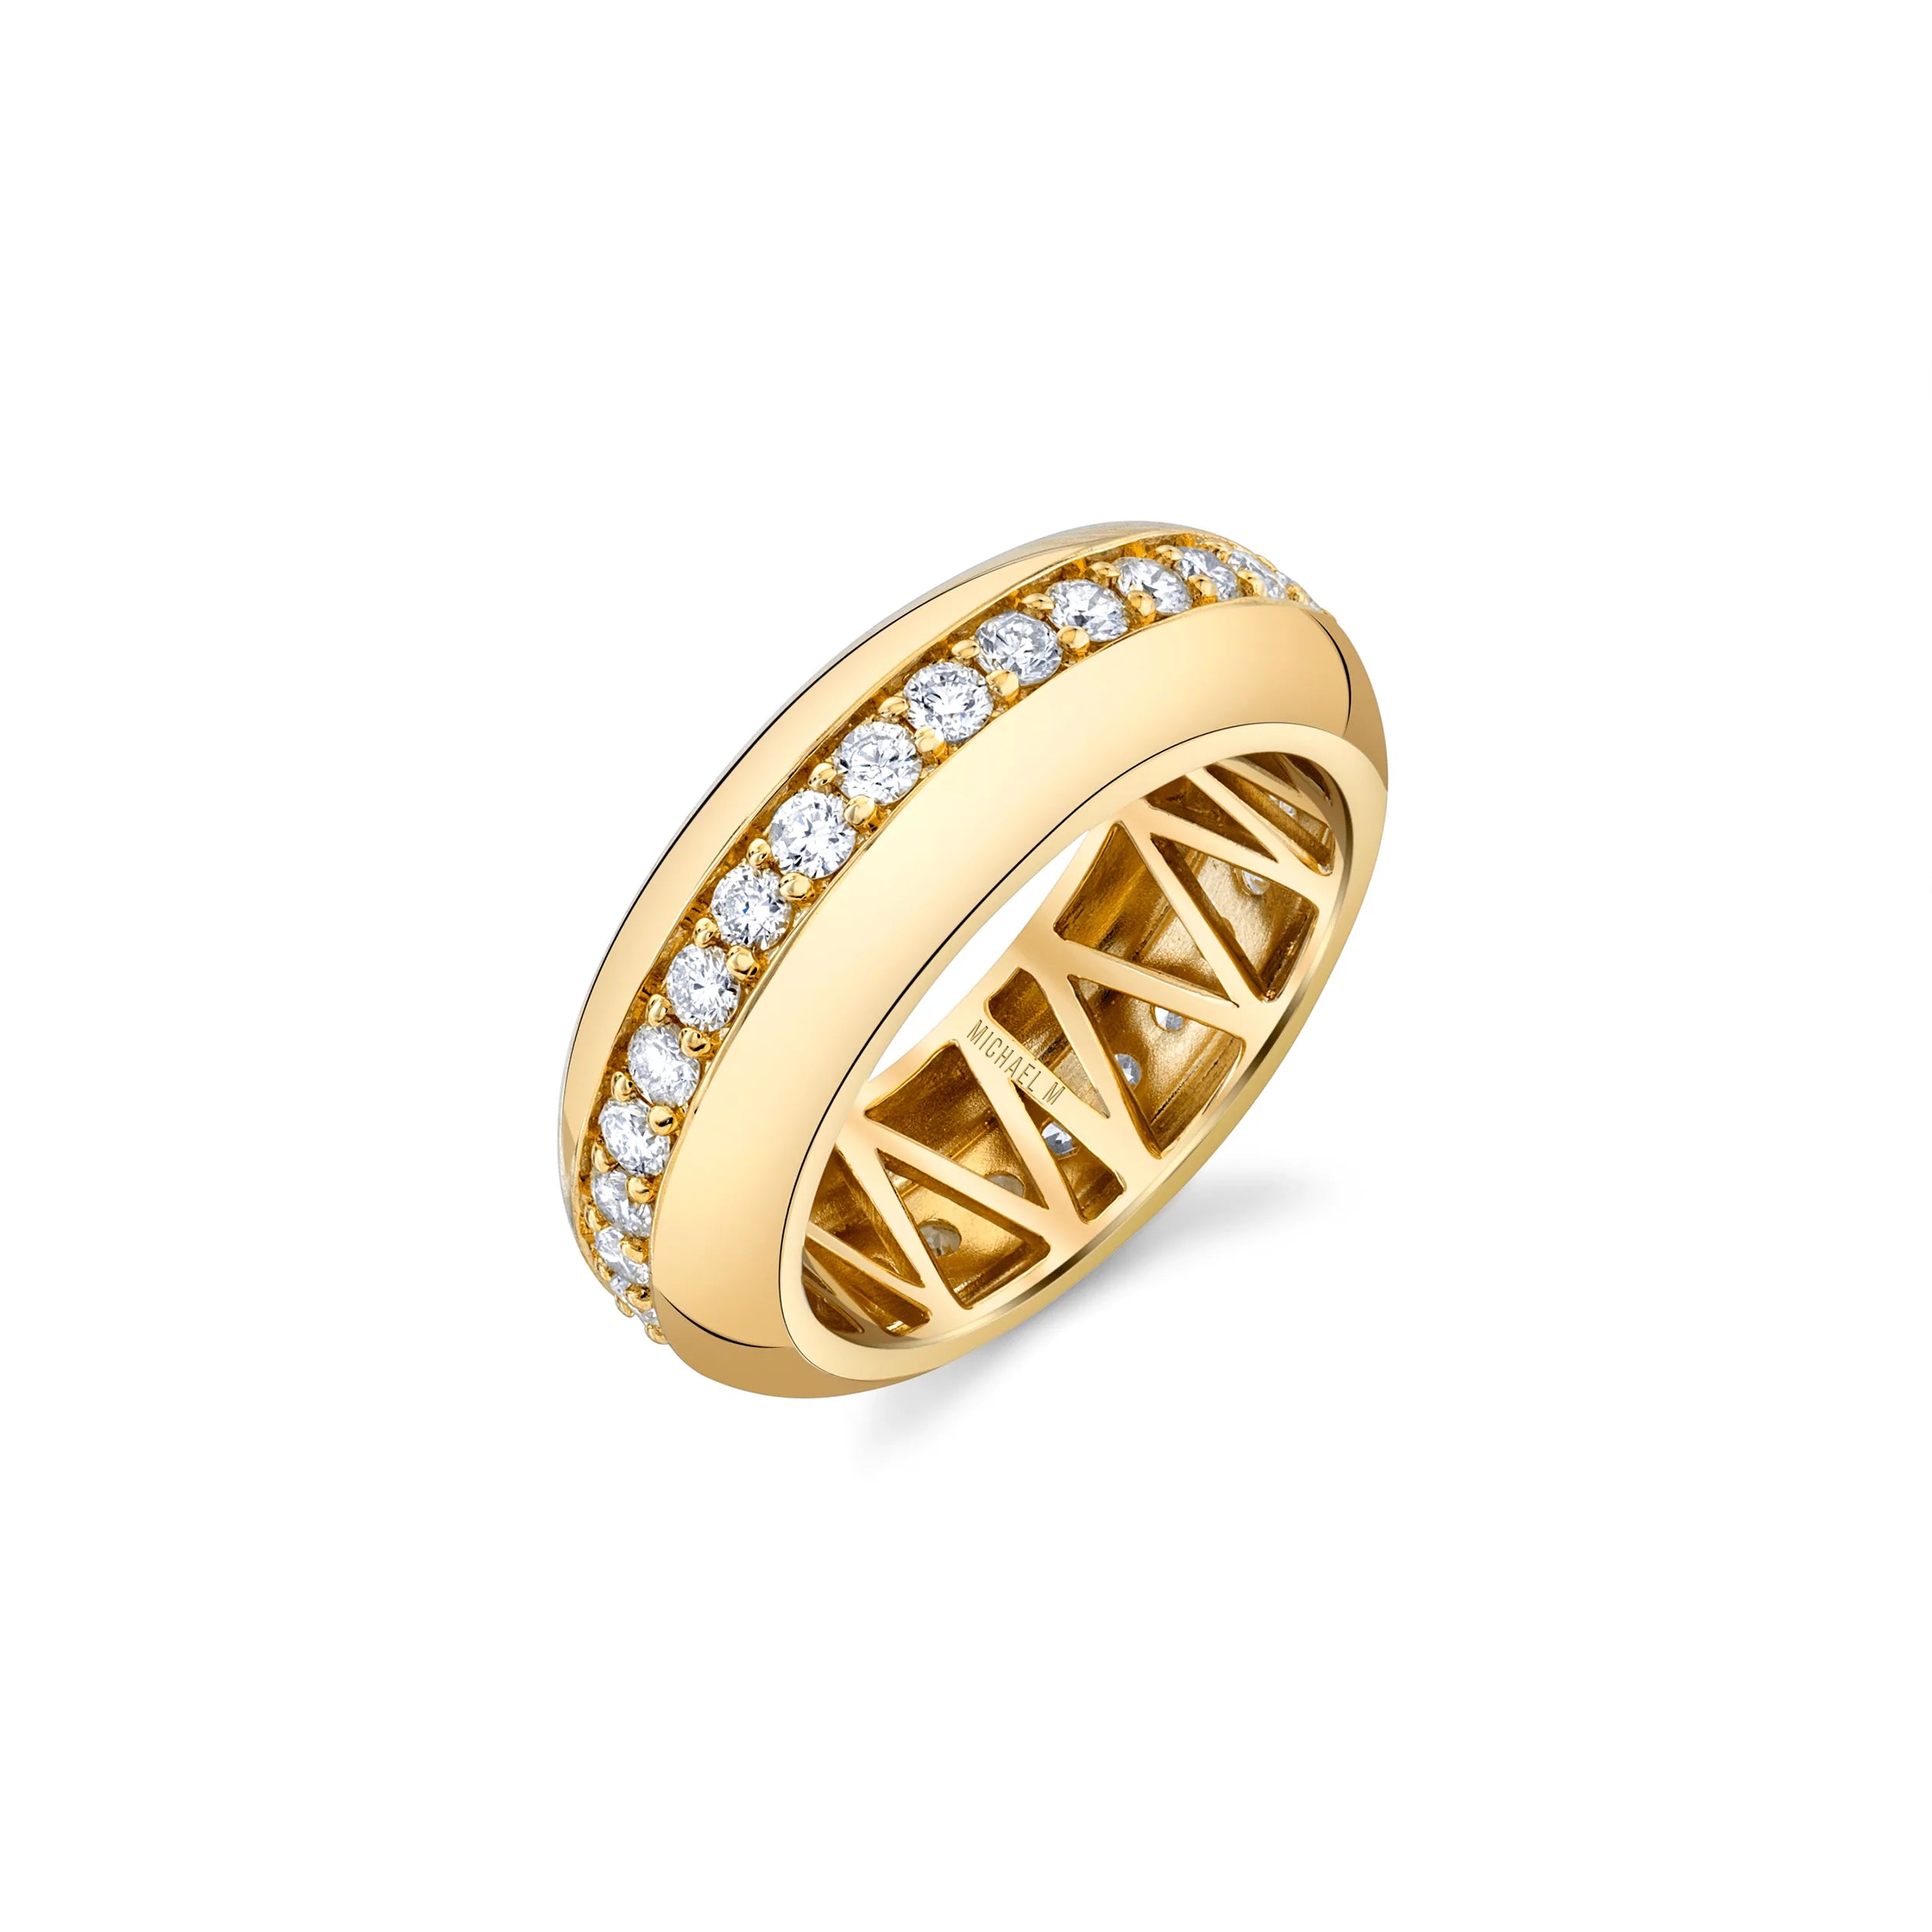 Bold Chunky Stacked Statement Ring in Gold | Uncommon James